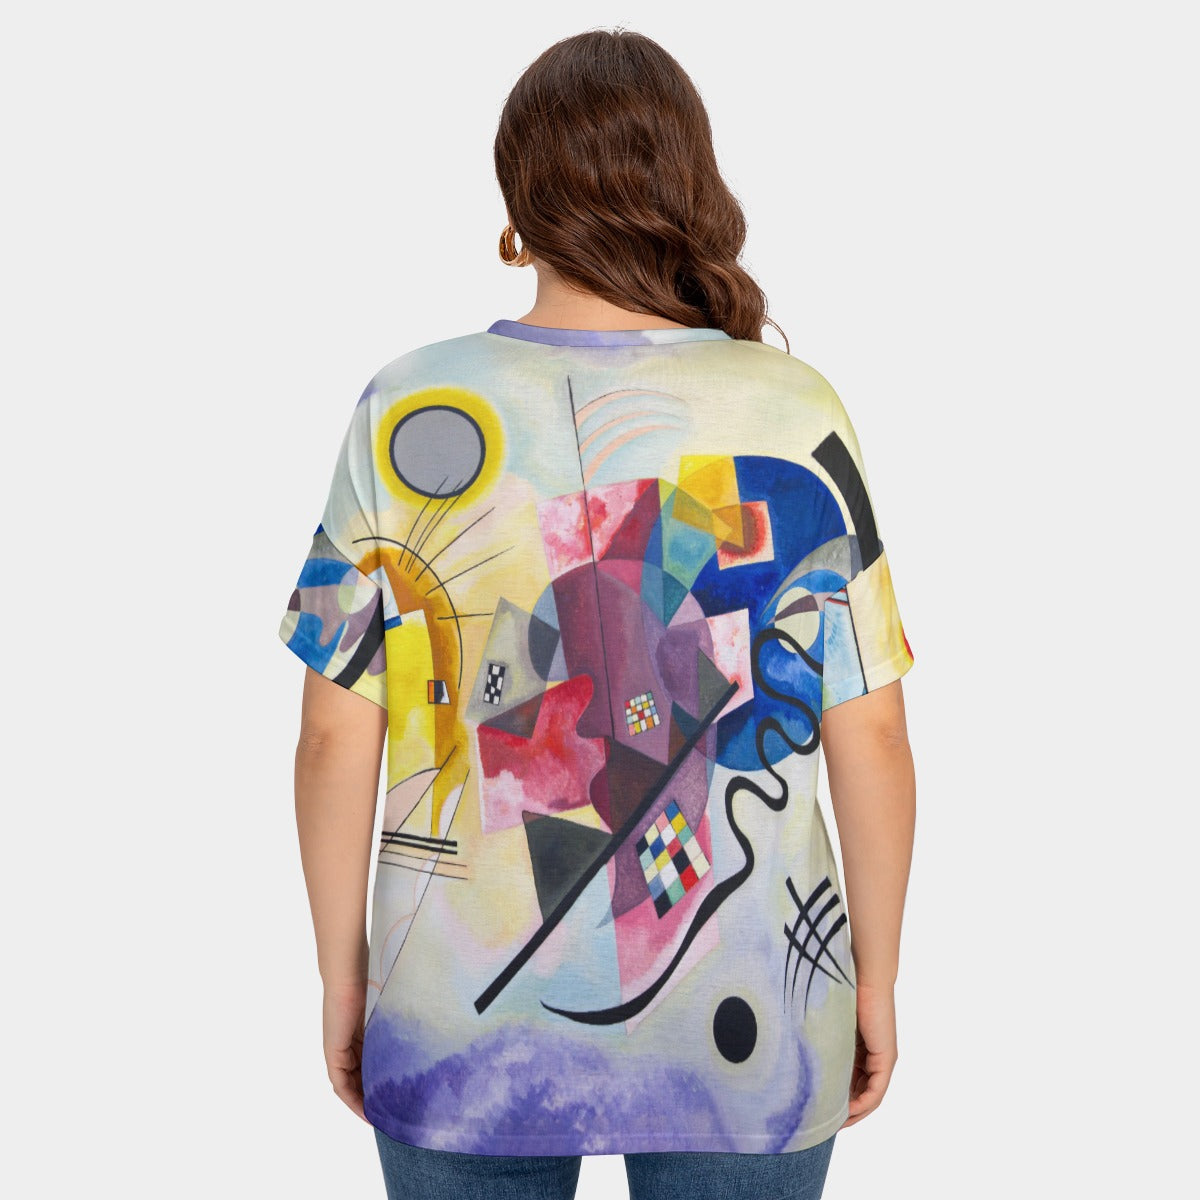 Colorful abstract art print on women's t-shirt